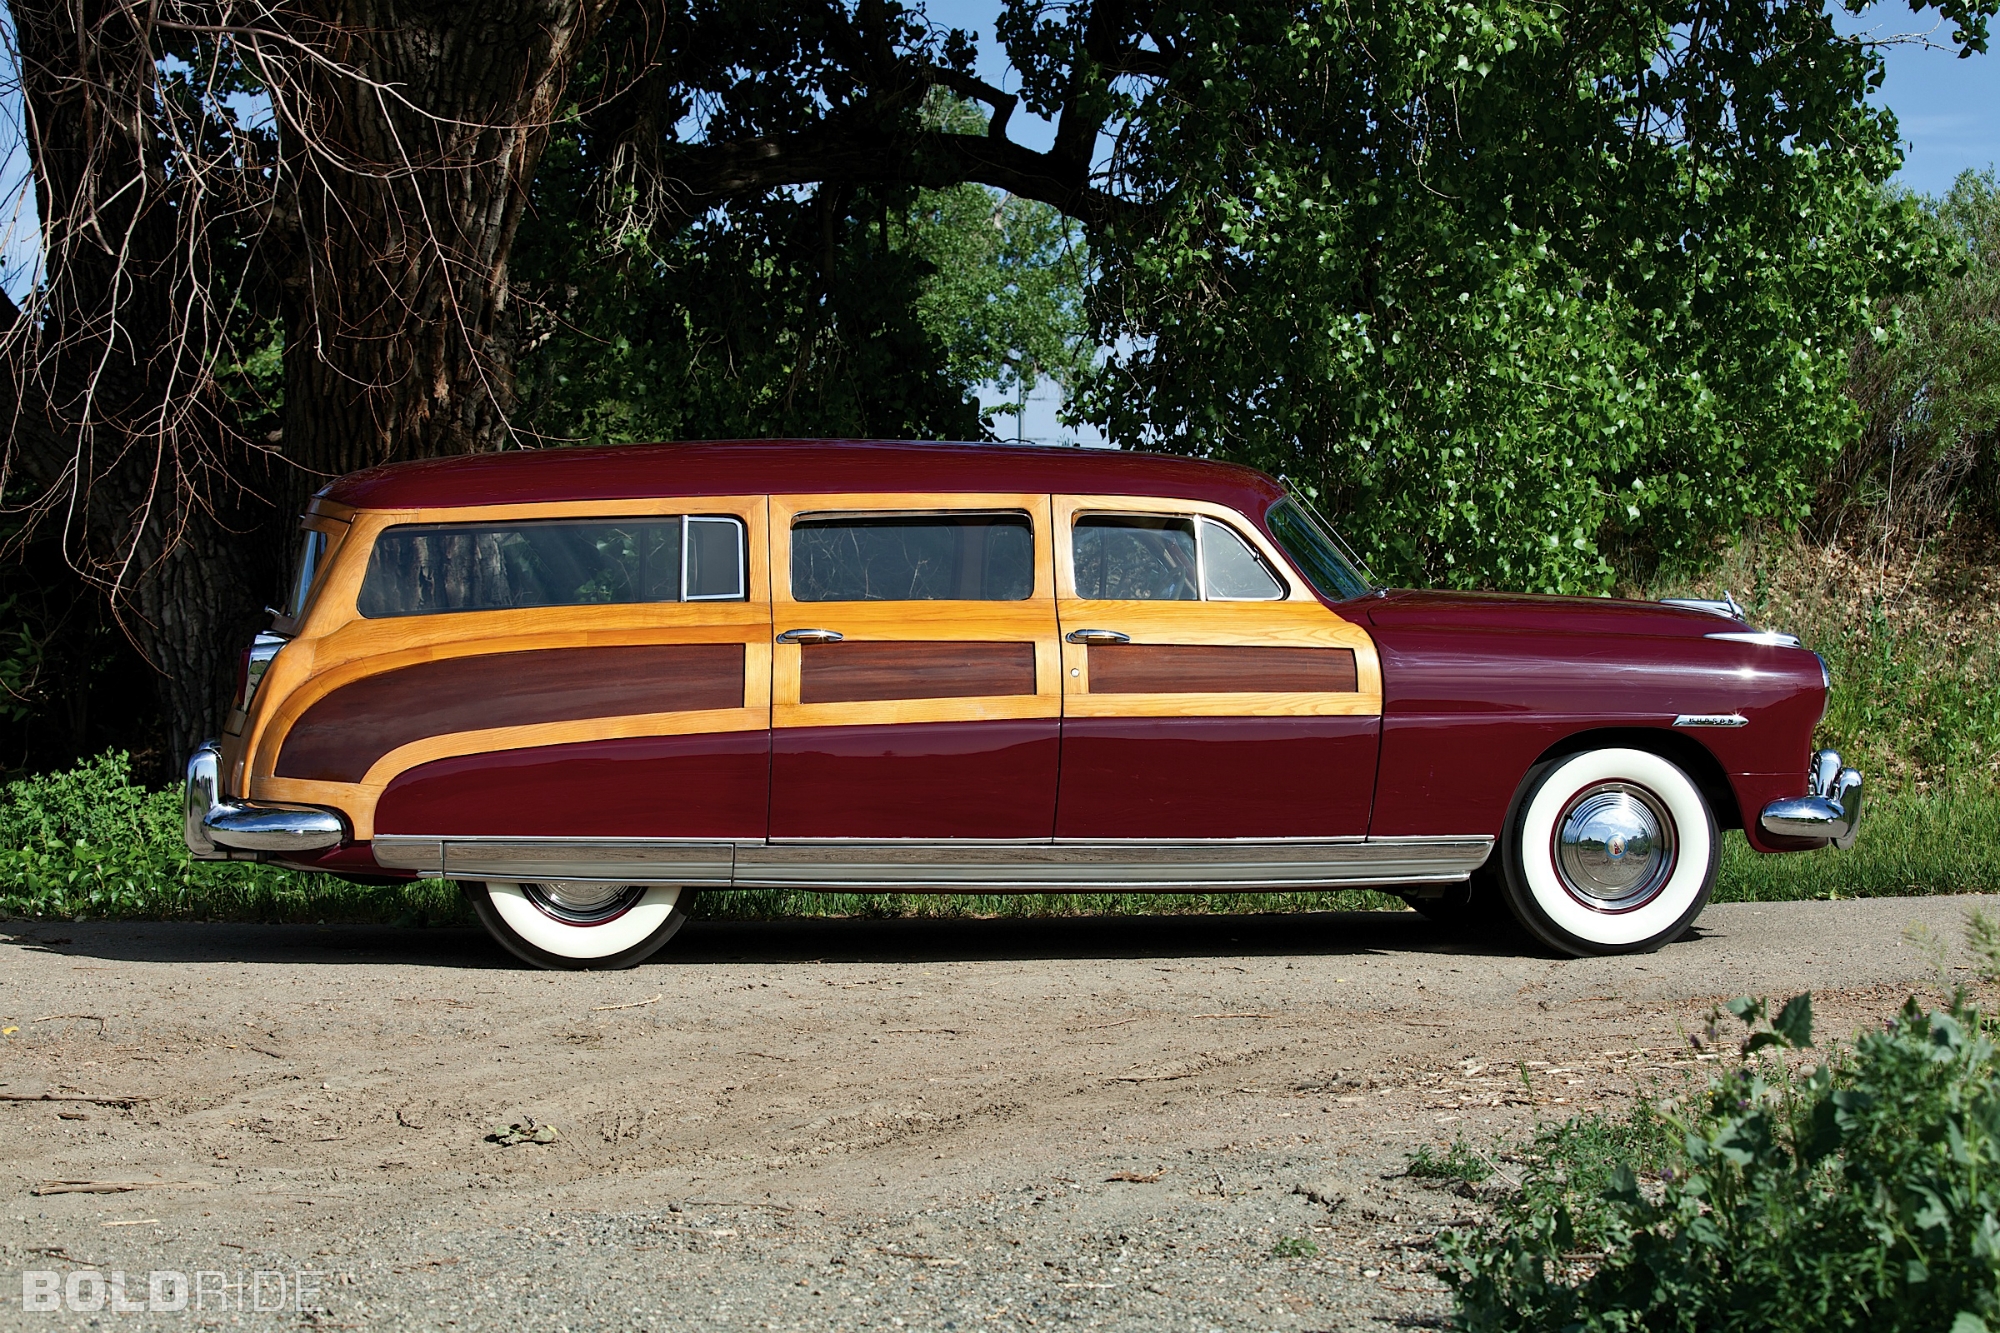 1948 Hudson Commodore Eight Station Wagon Boldride.com - Pictures ...